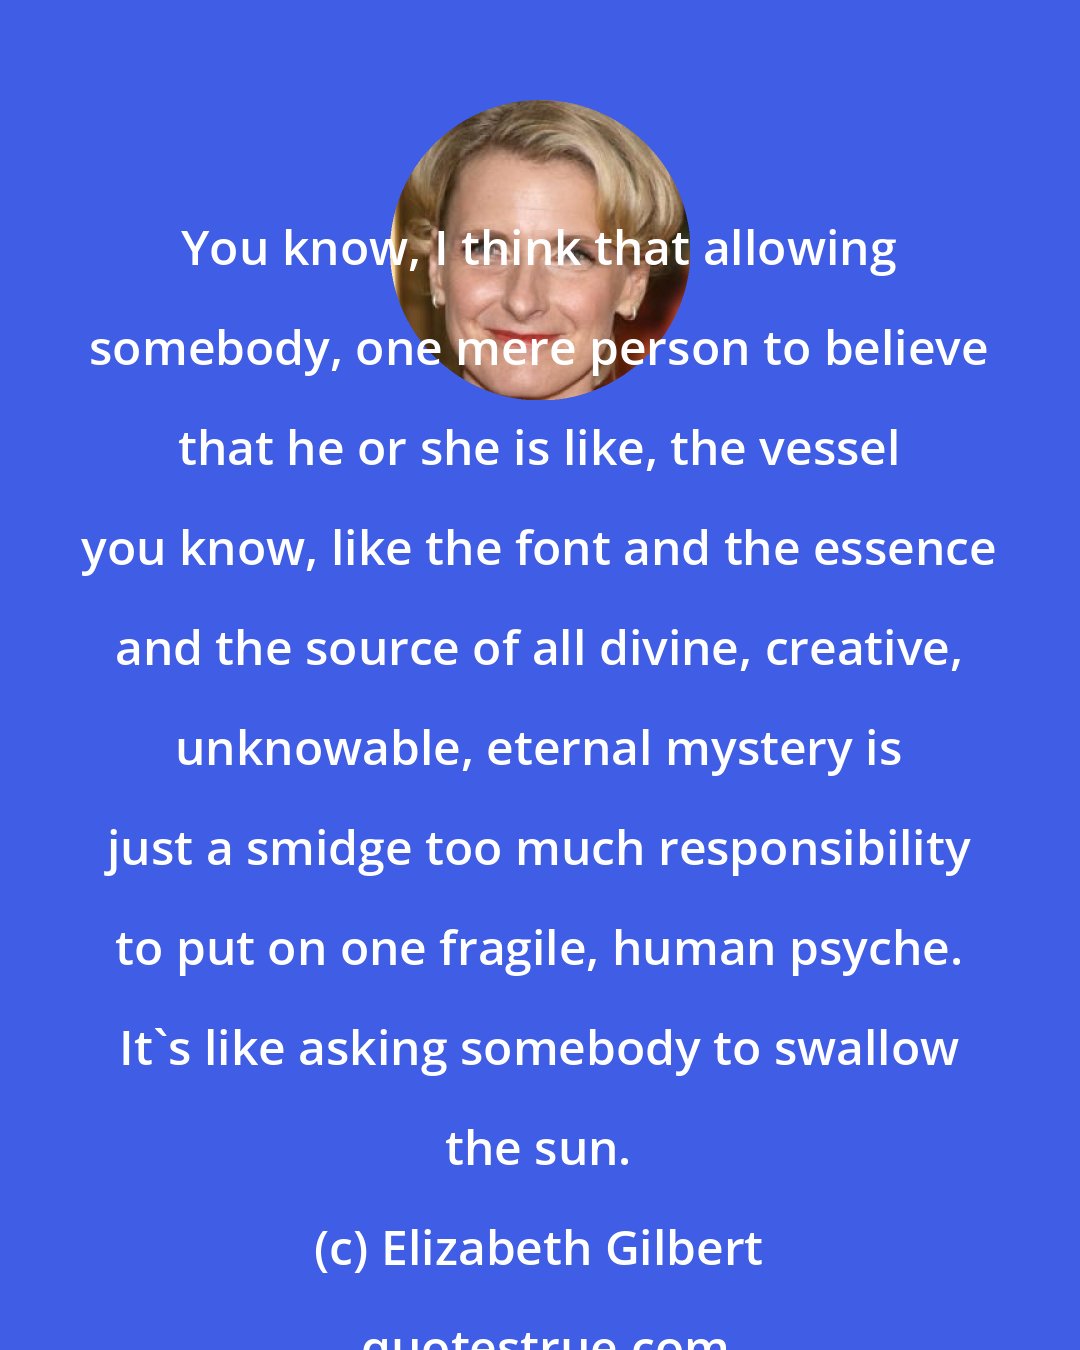 Elizabeth Gilbert: You know, I think that allowing somebody, one mere person to believe that he or she is like, the vessel you know, like the font and the essence and the source of all divine, creative, unknowable, eternal mystery is just a smidge too much responsibility to put on one fragile, human psyche. It's like asking somebody to swallow the sun.